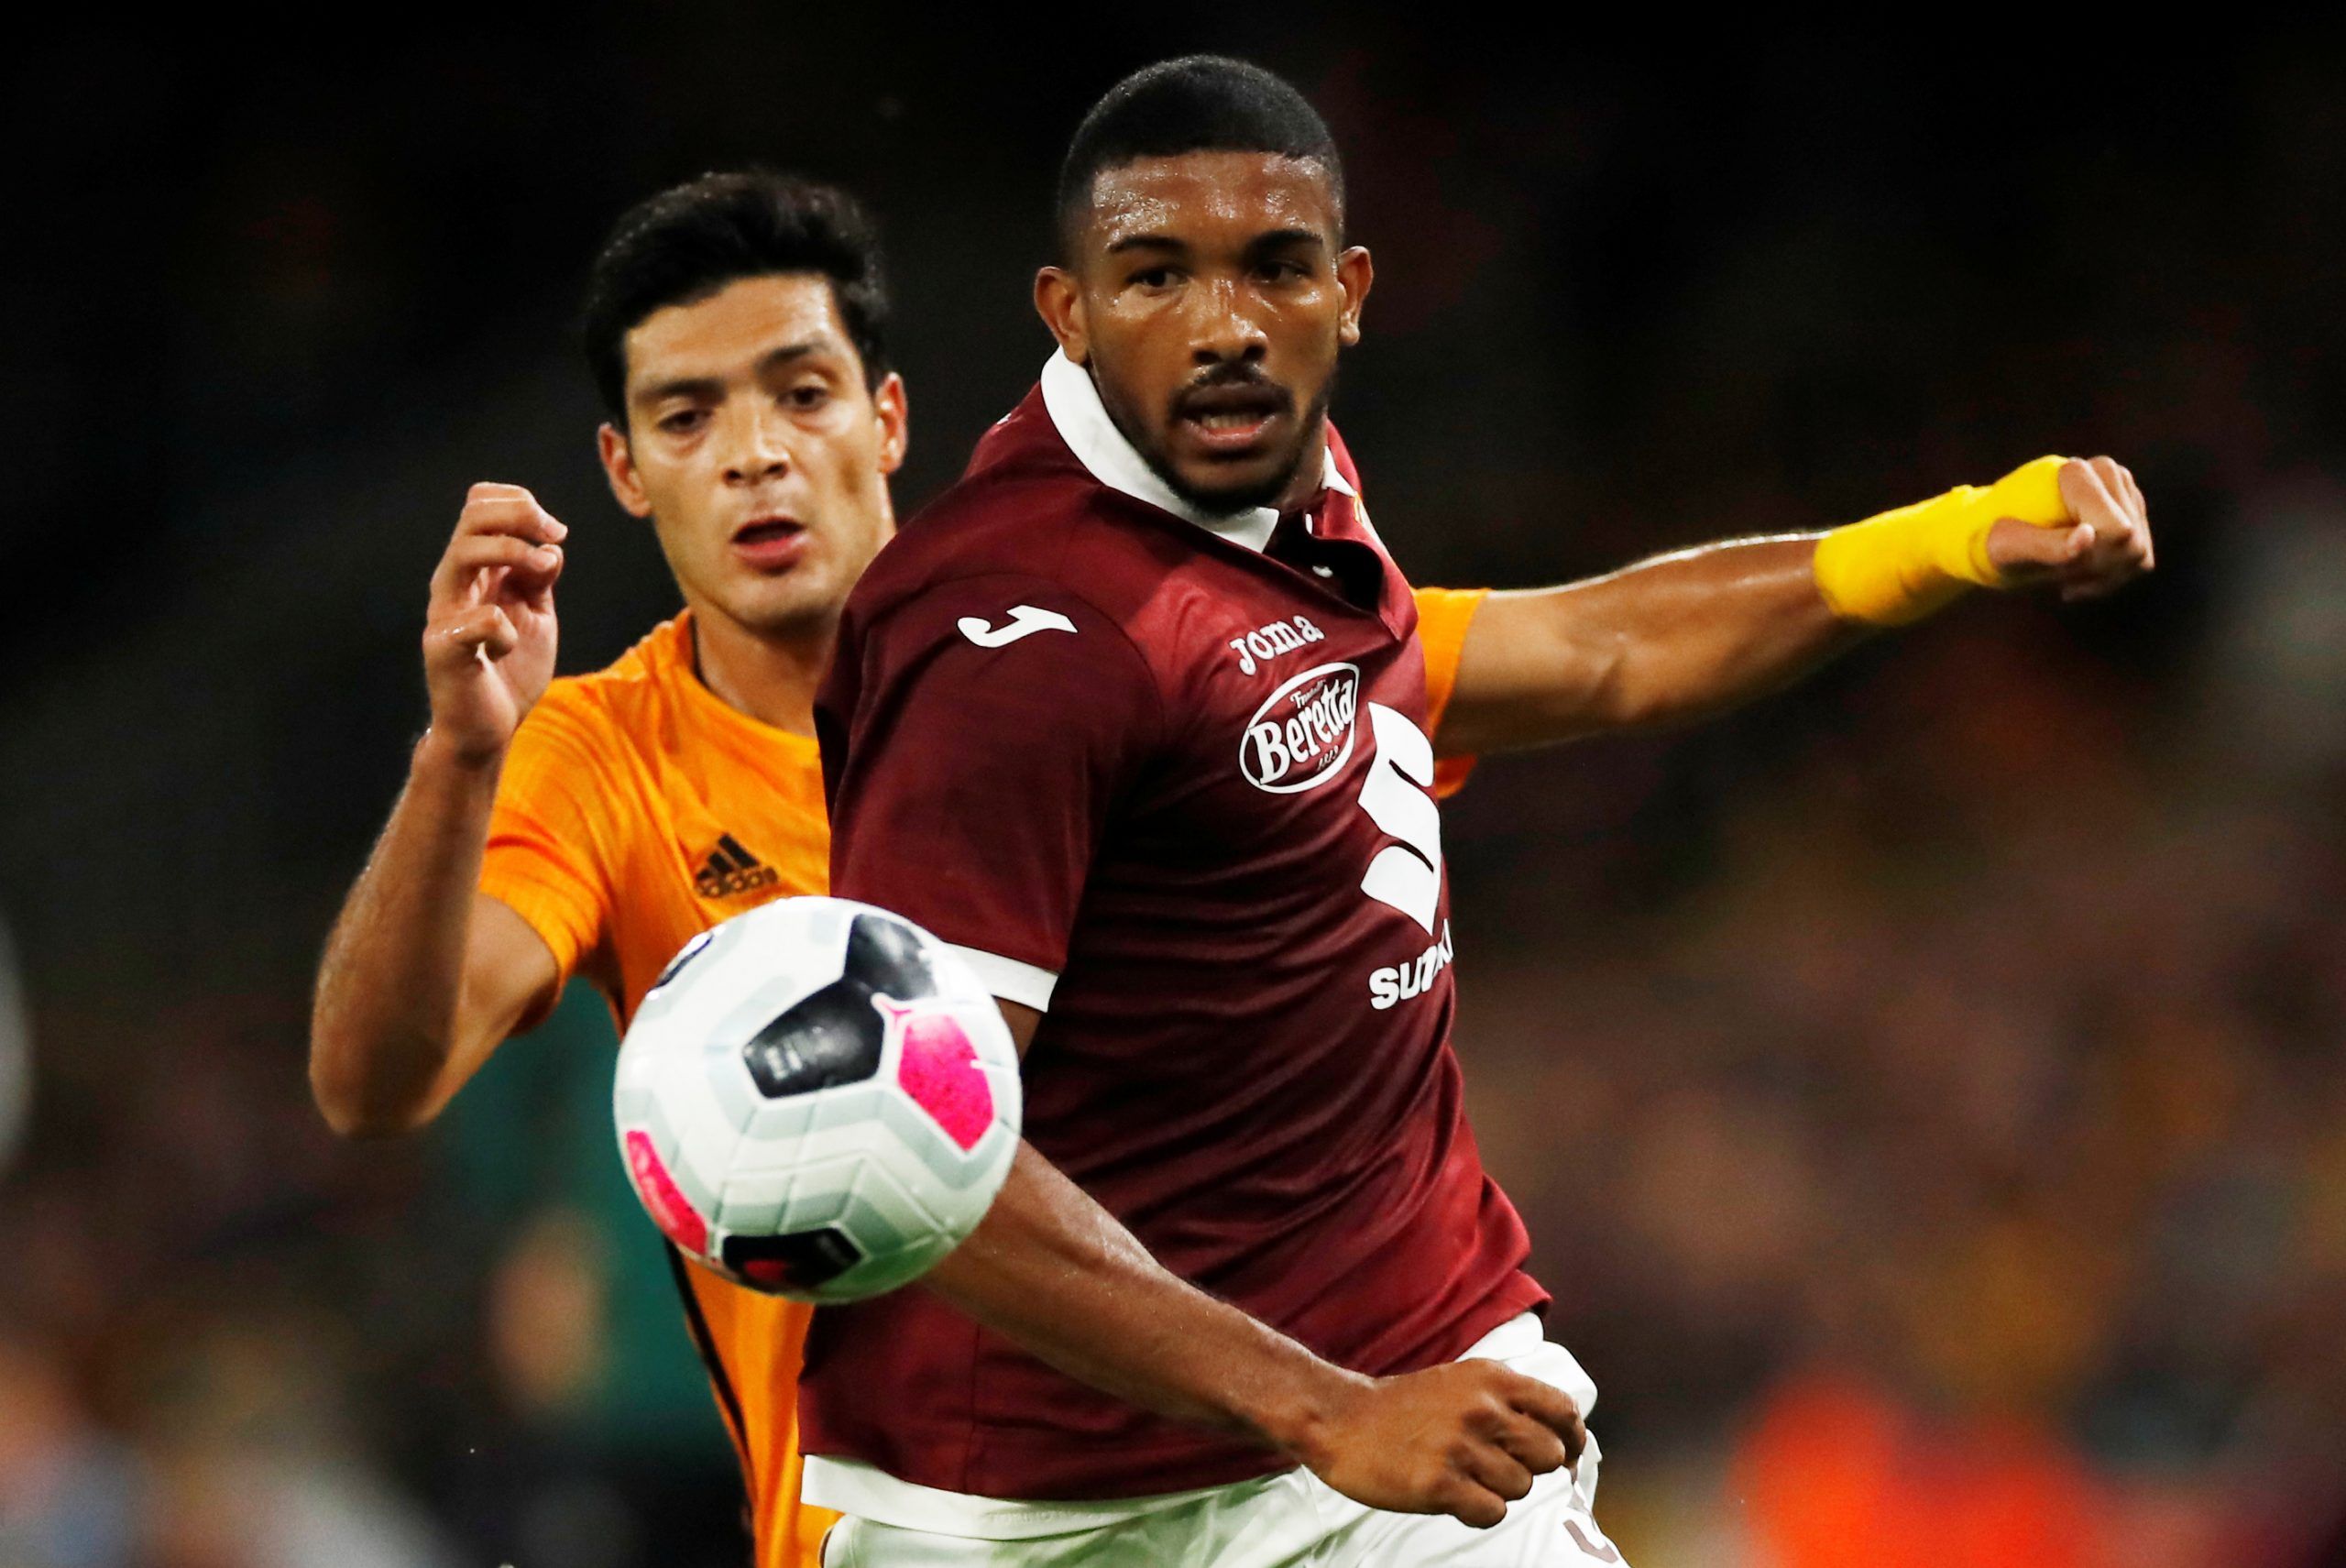 Soccer Football - Europa League - Playoffs - Second Leg - Wolverhampton Wanderers v Torino - Molineux Stadium, Wolverhampton, Britain - August 29, 2019   Wolverhampton Wanderers' Raul Jimenez in action with Torino's Gleison Bremer       Action Images via Reuters/Andrew Boyers